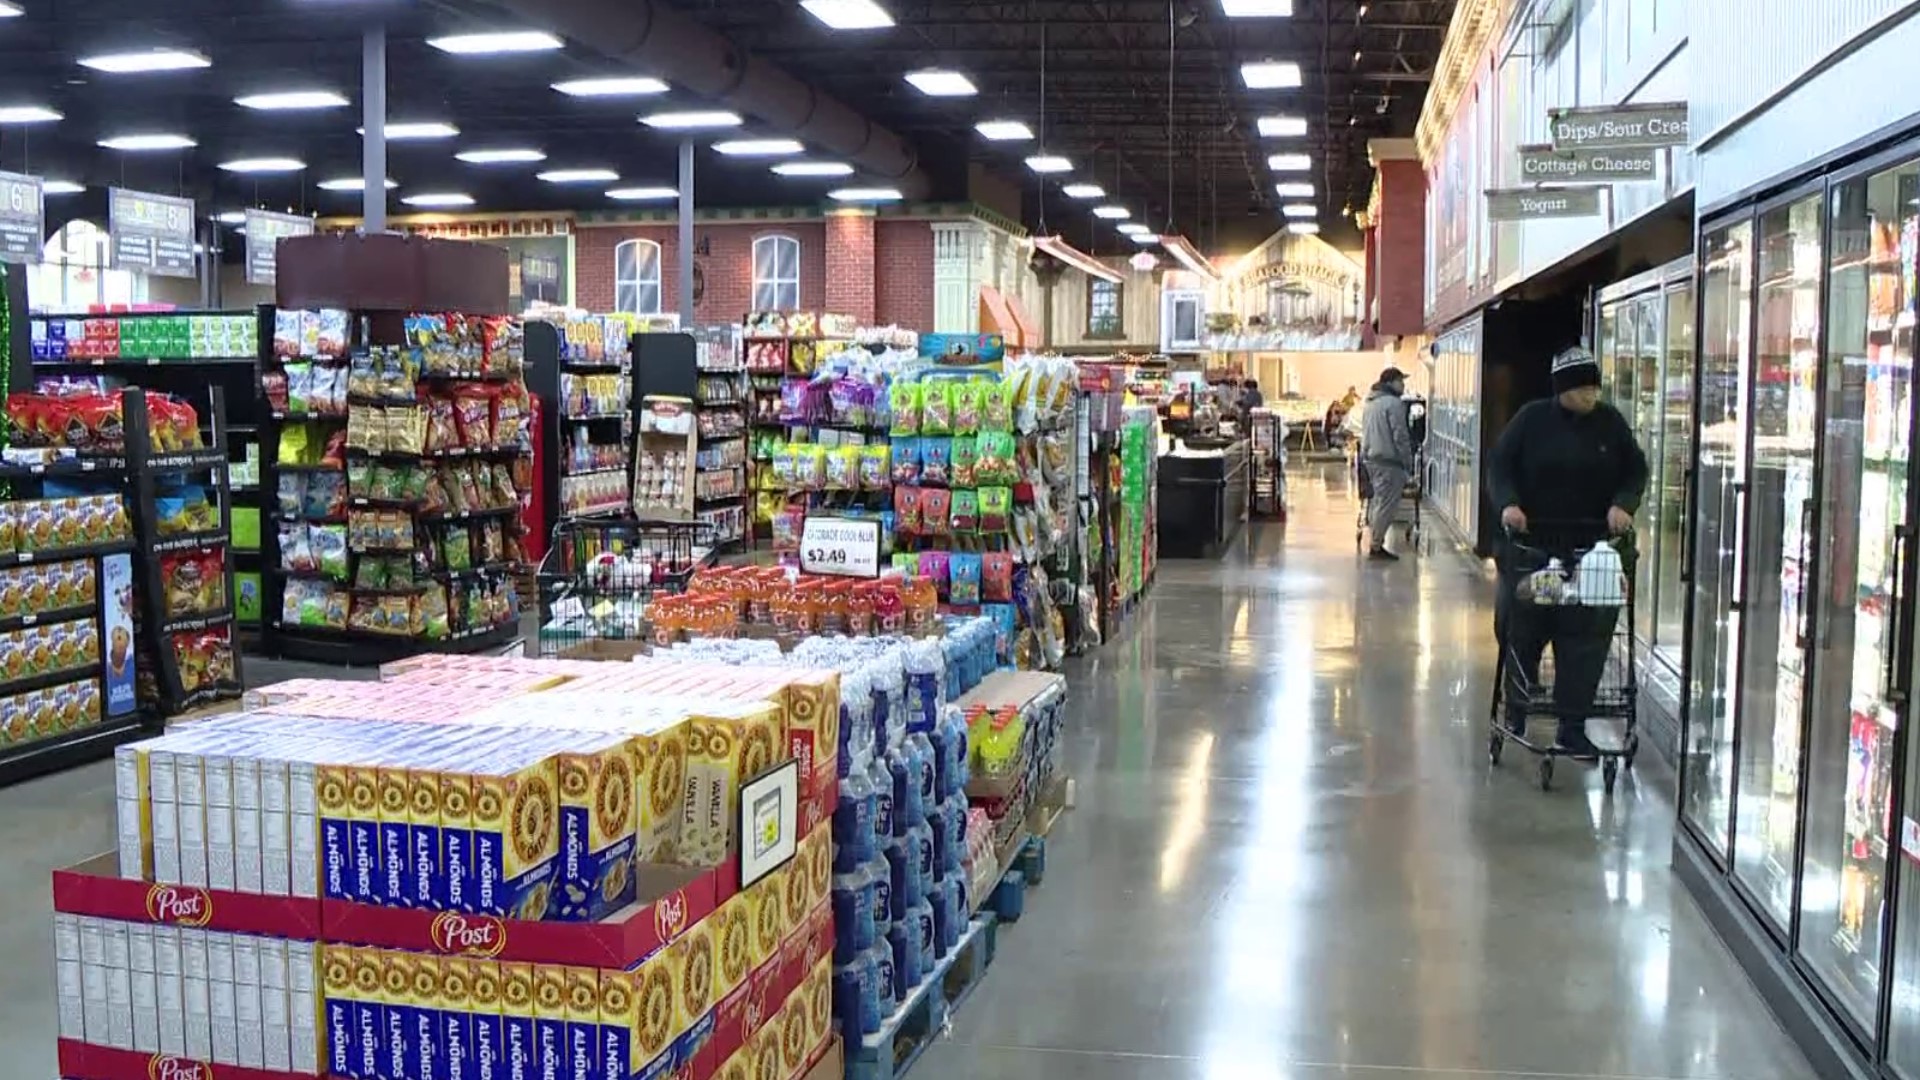 Grocery stores in the St. Louis area have seen a steady crowd come in ahead of the holidays. Many are also preparing for cold temperatures and snow on Thursday.